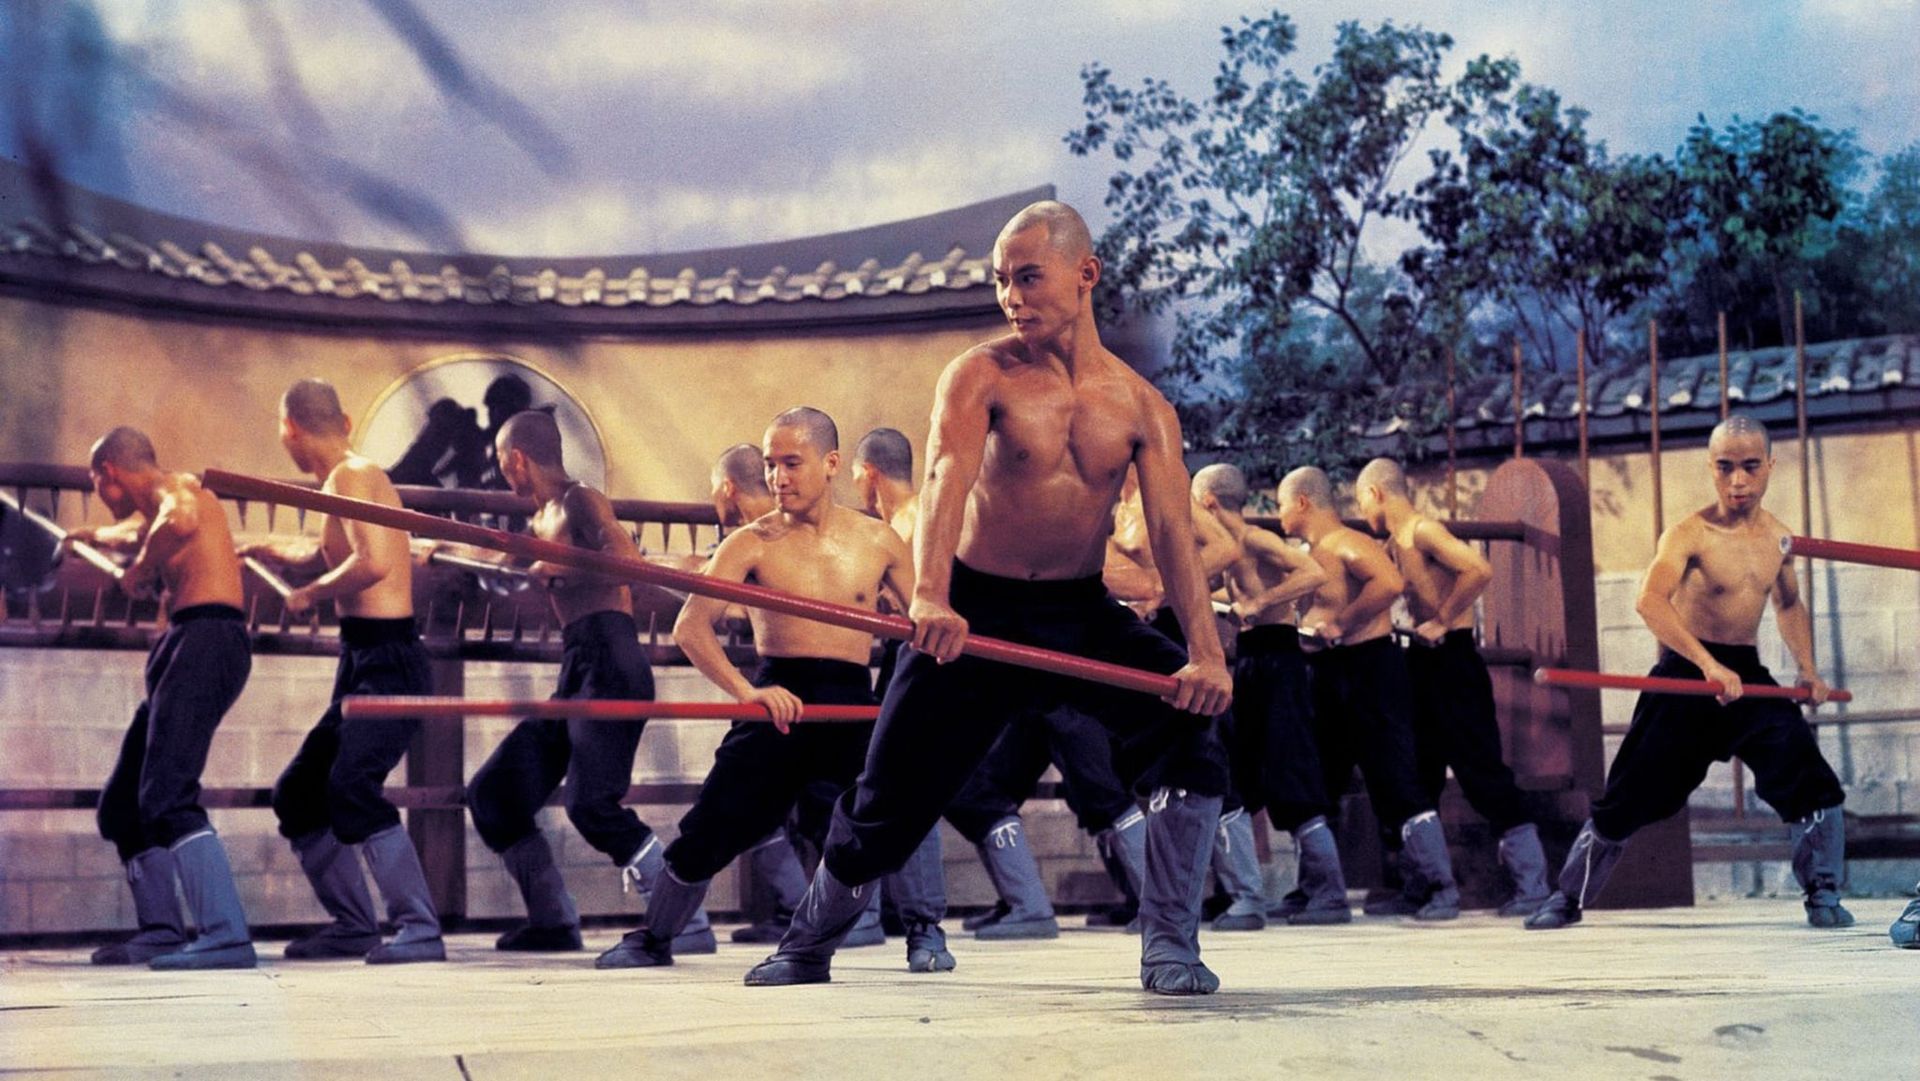 The 36th Chamber of Shaolin Backdrop